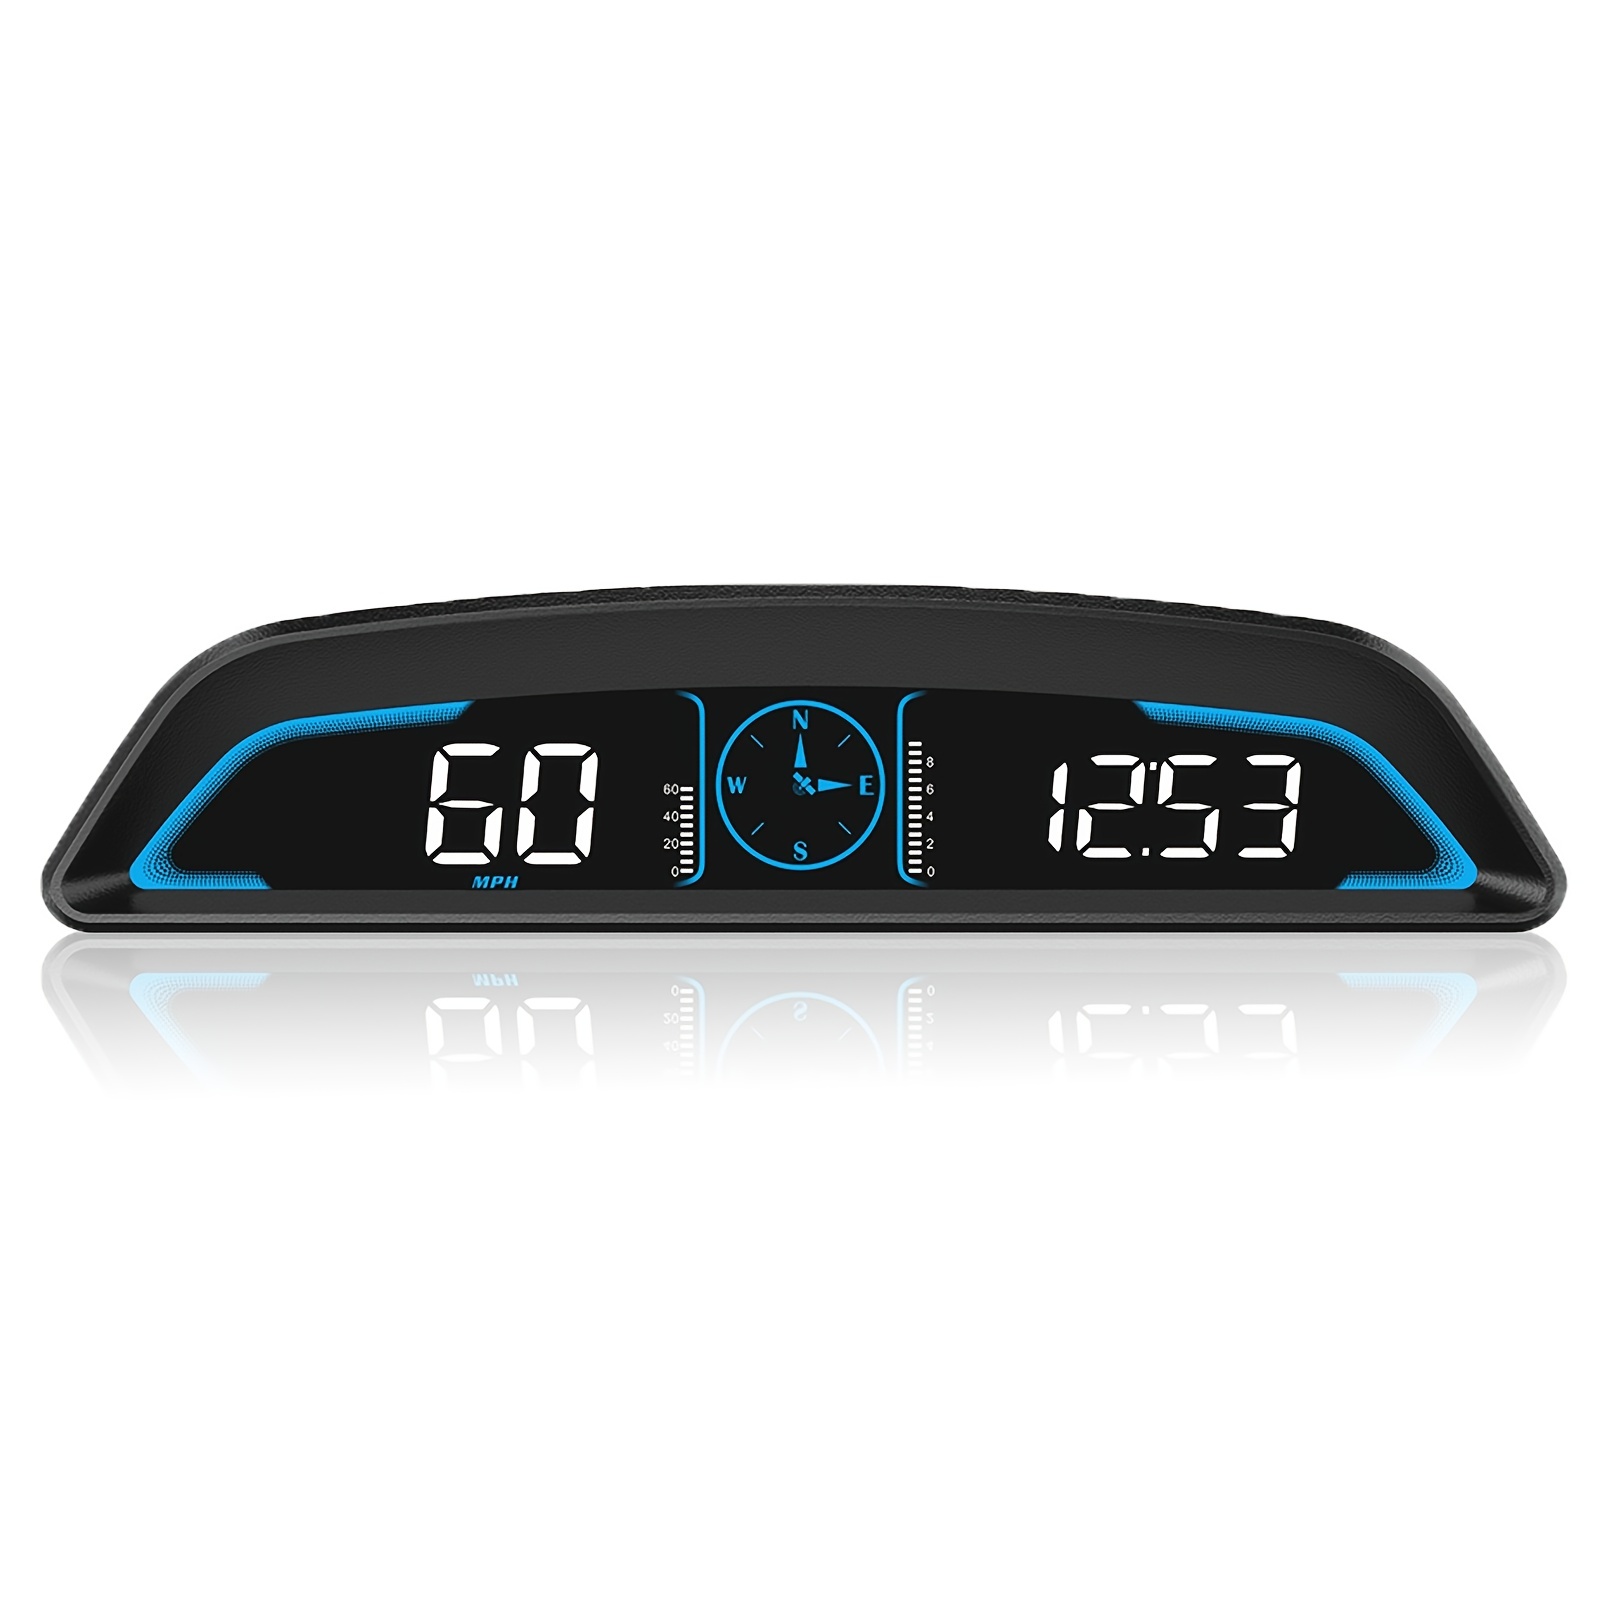 C500 Obd Car Projection Head Up Display, Universal Vehicle Speed